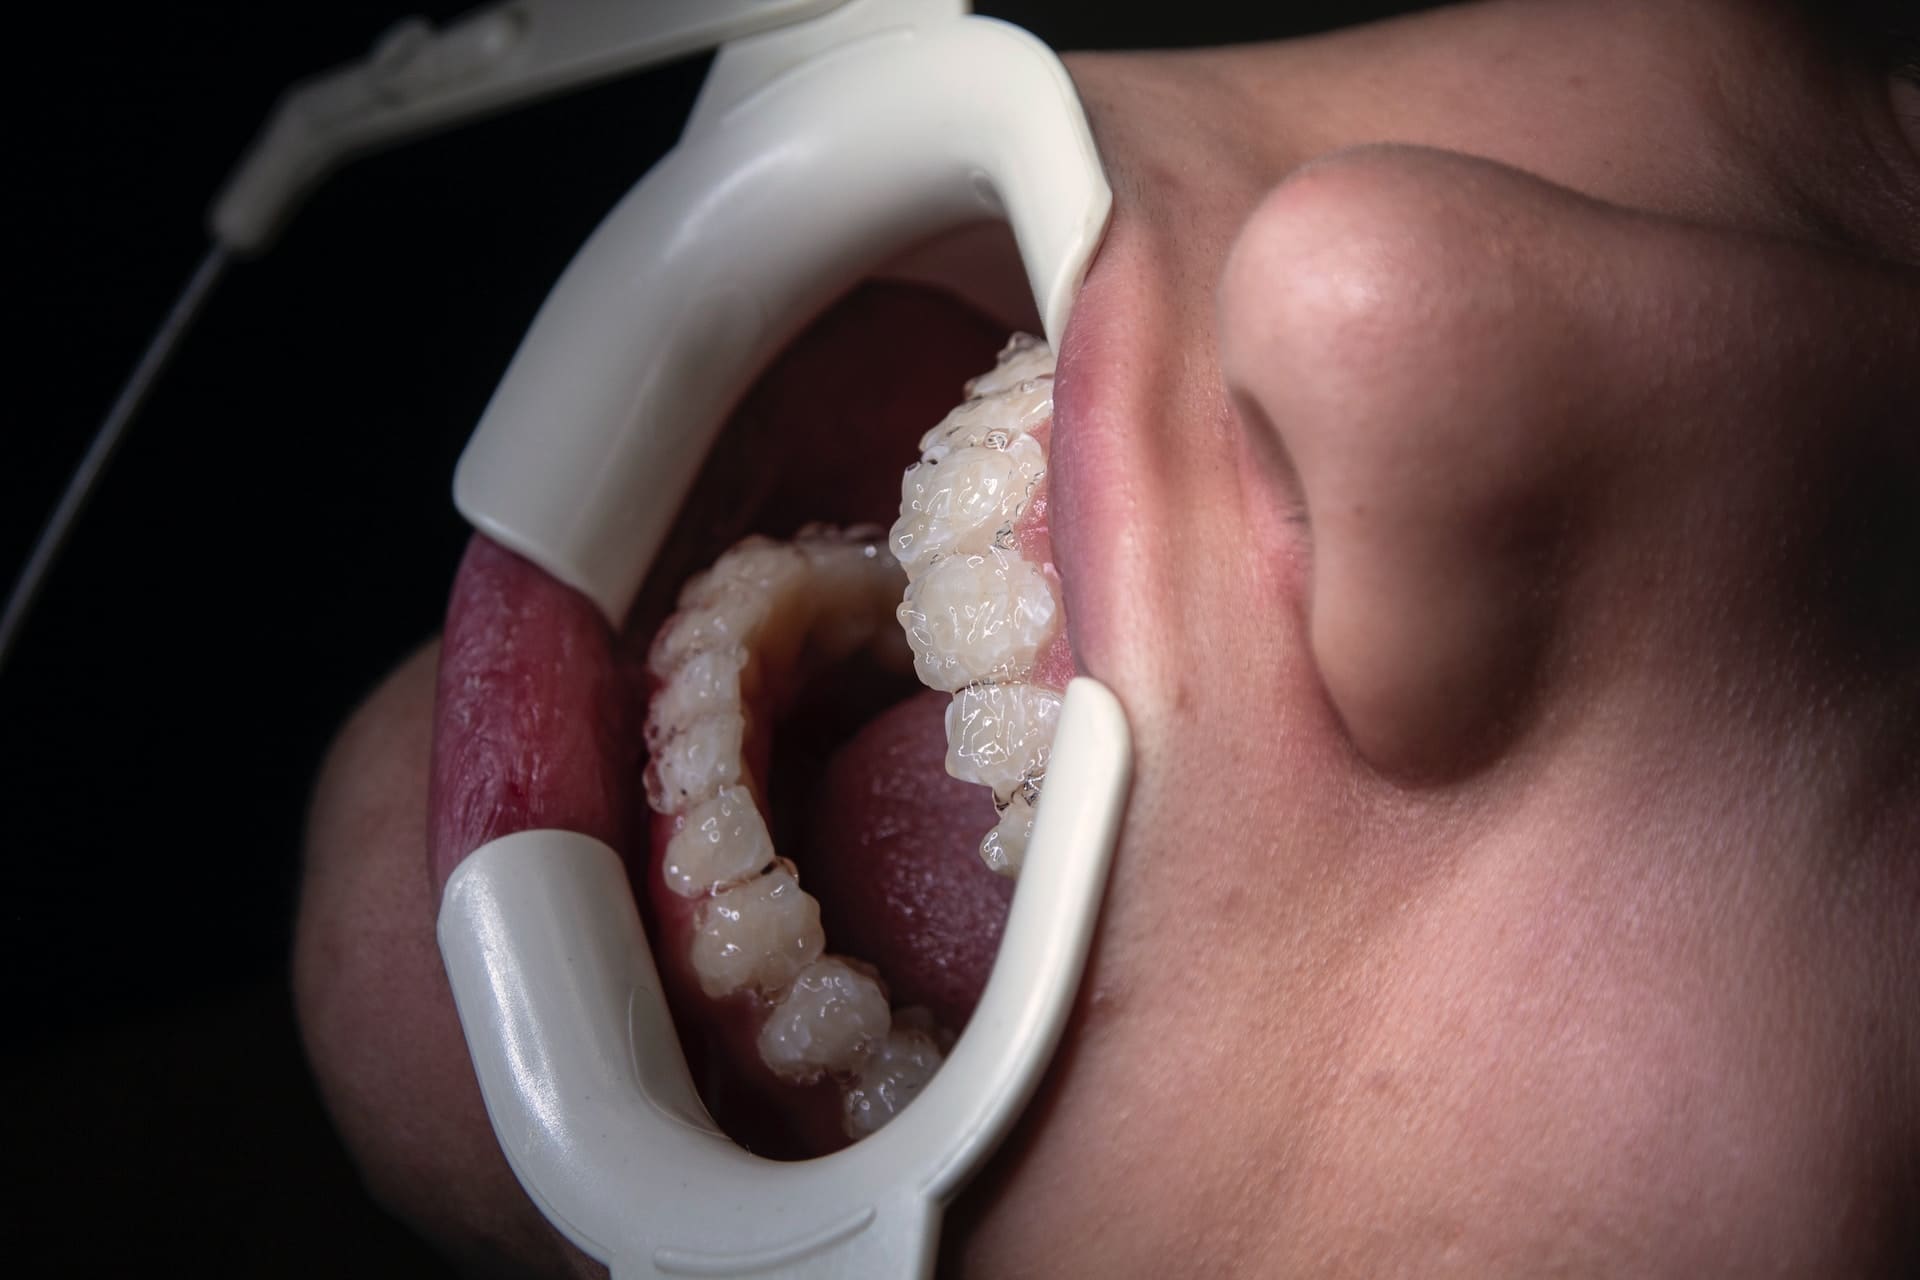 Mouth opener device placed in the patient's mouth, revealing the teeth.